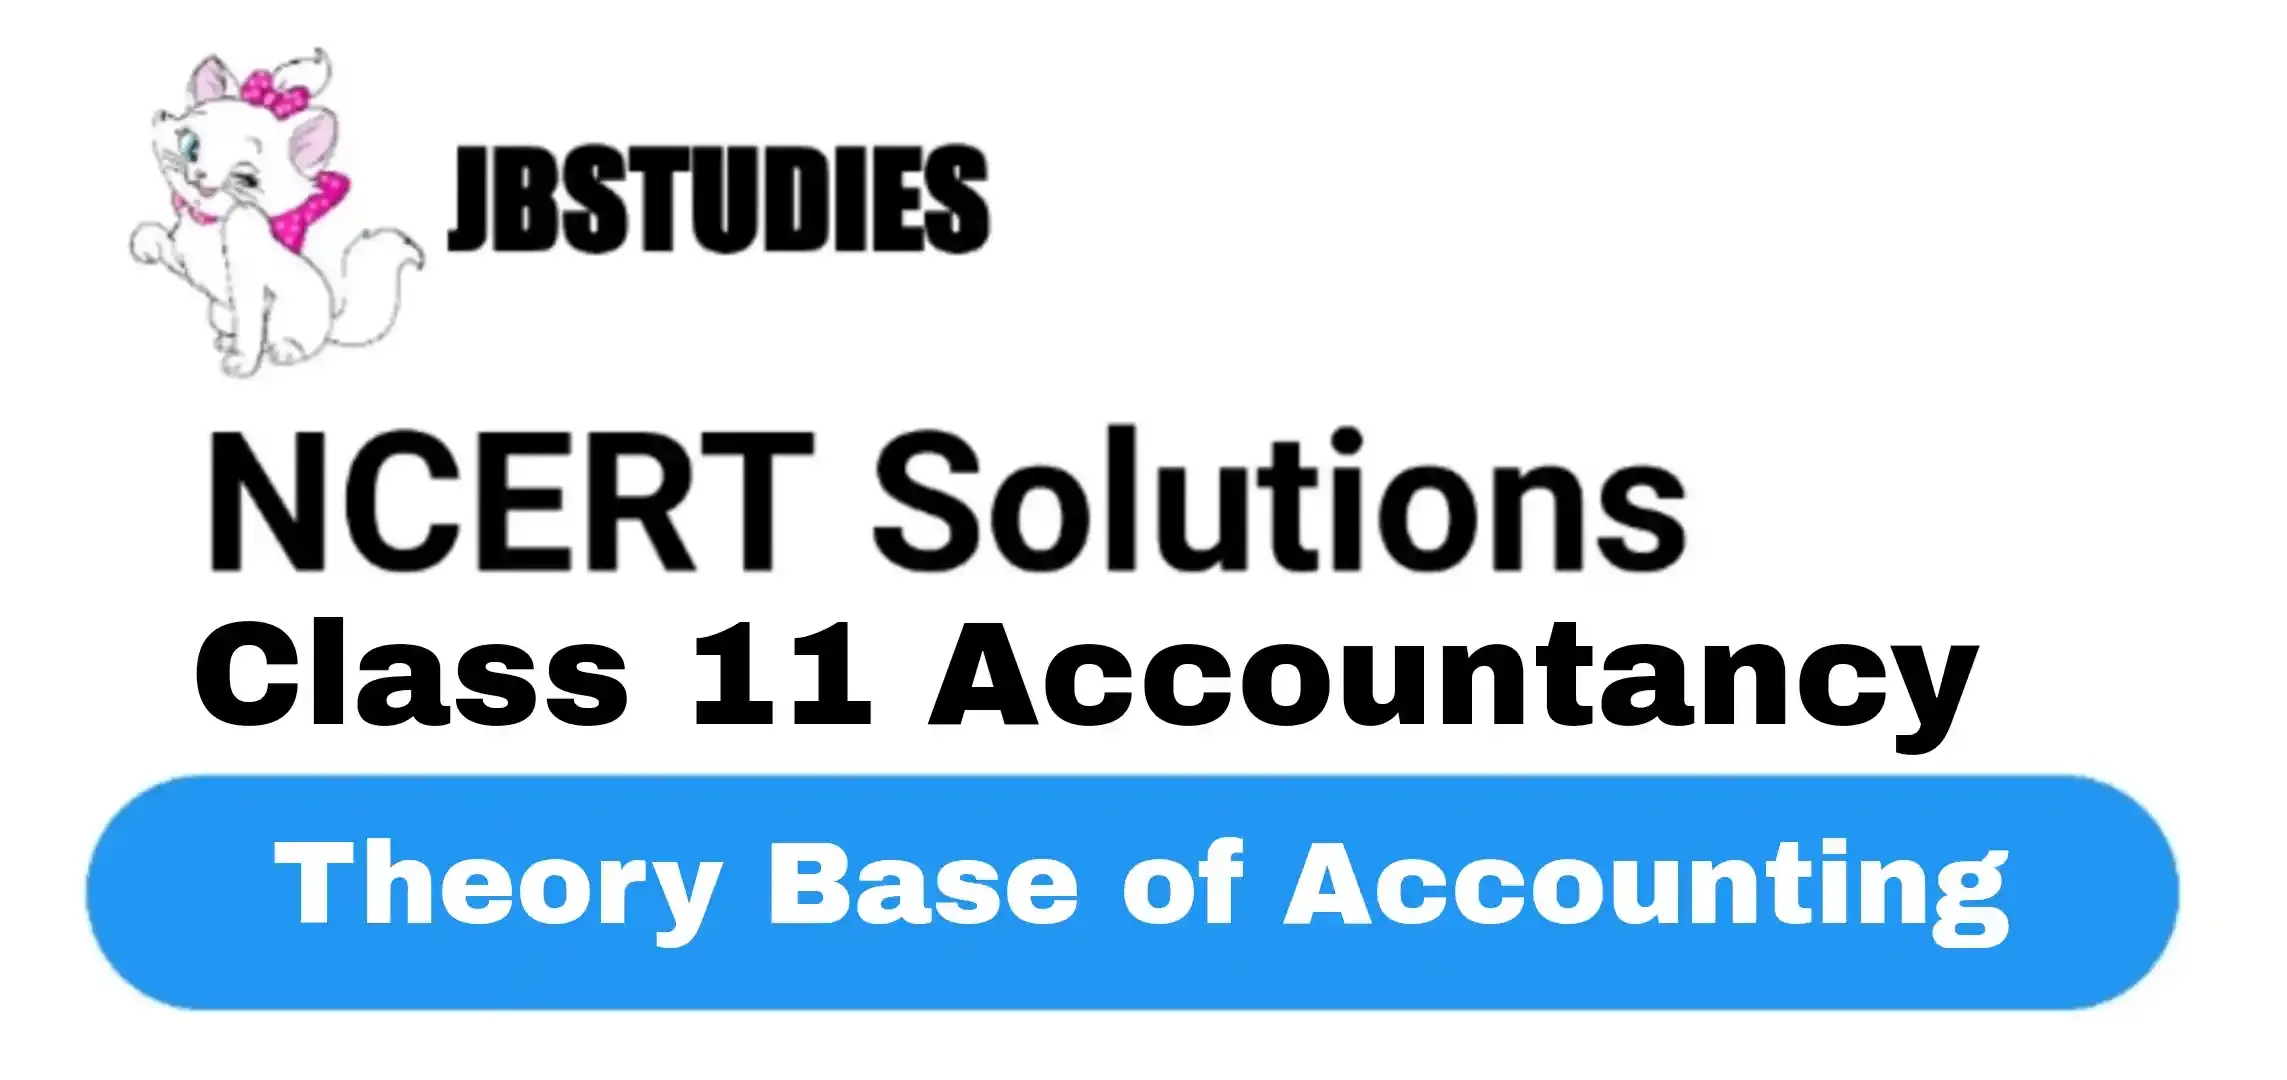 Solutions Class 11 Accountancy Chapter -2 (Theory Base of Accounting)